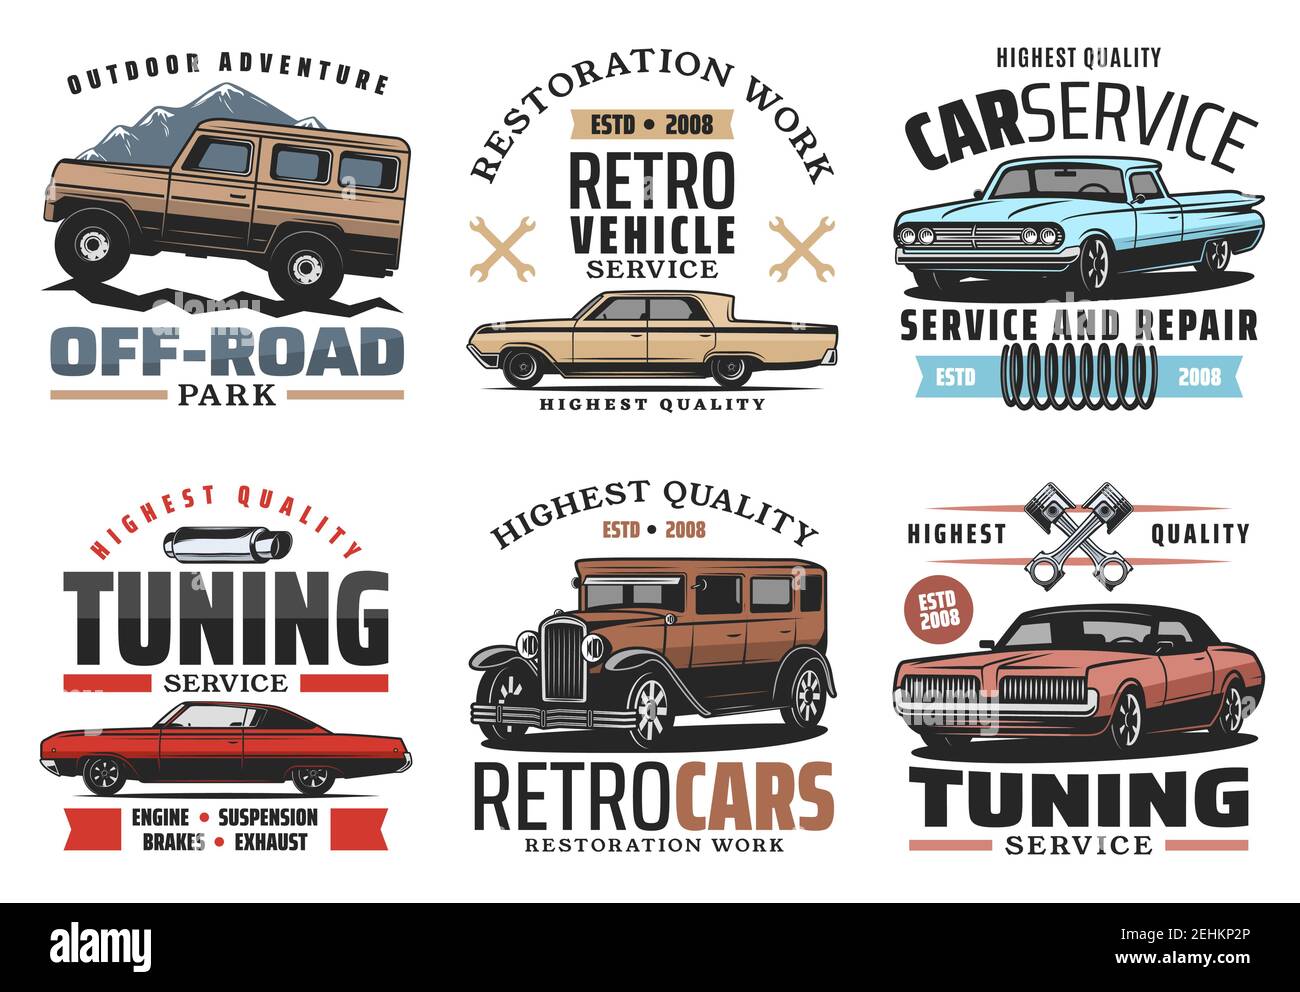 Car service tuning or restoration symbols for repairing garage. Off-road vehicle and outdoor adventure, retro transport restoration work and auto part Stock Vector